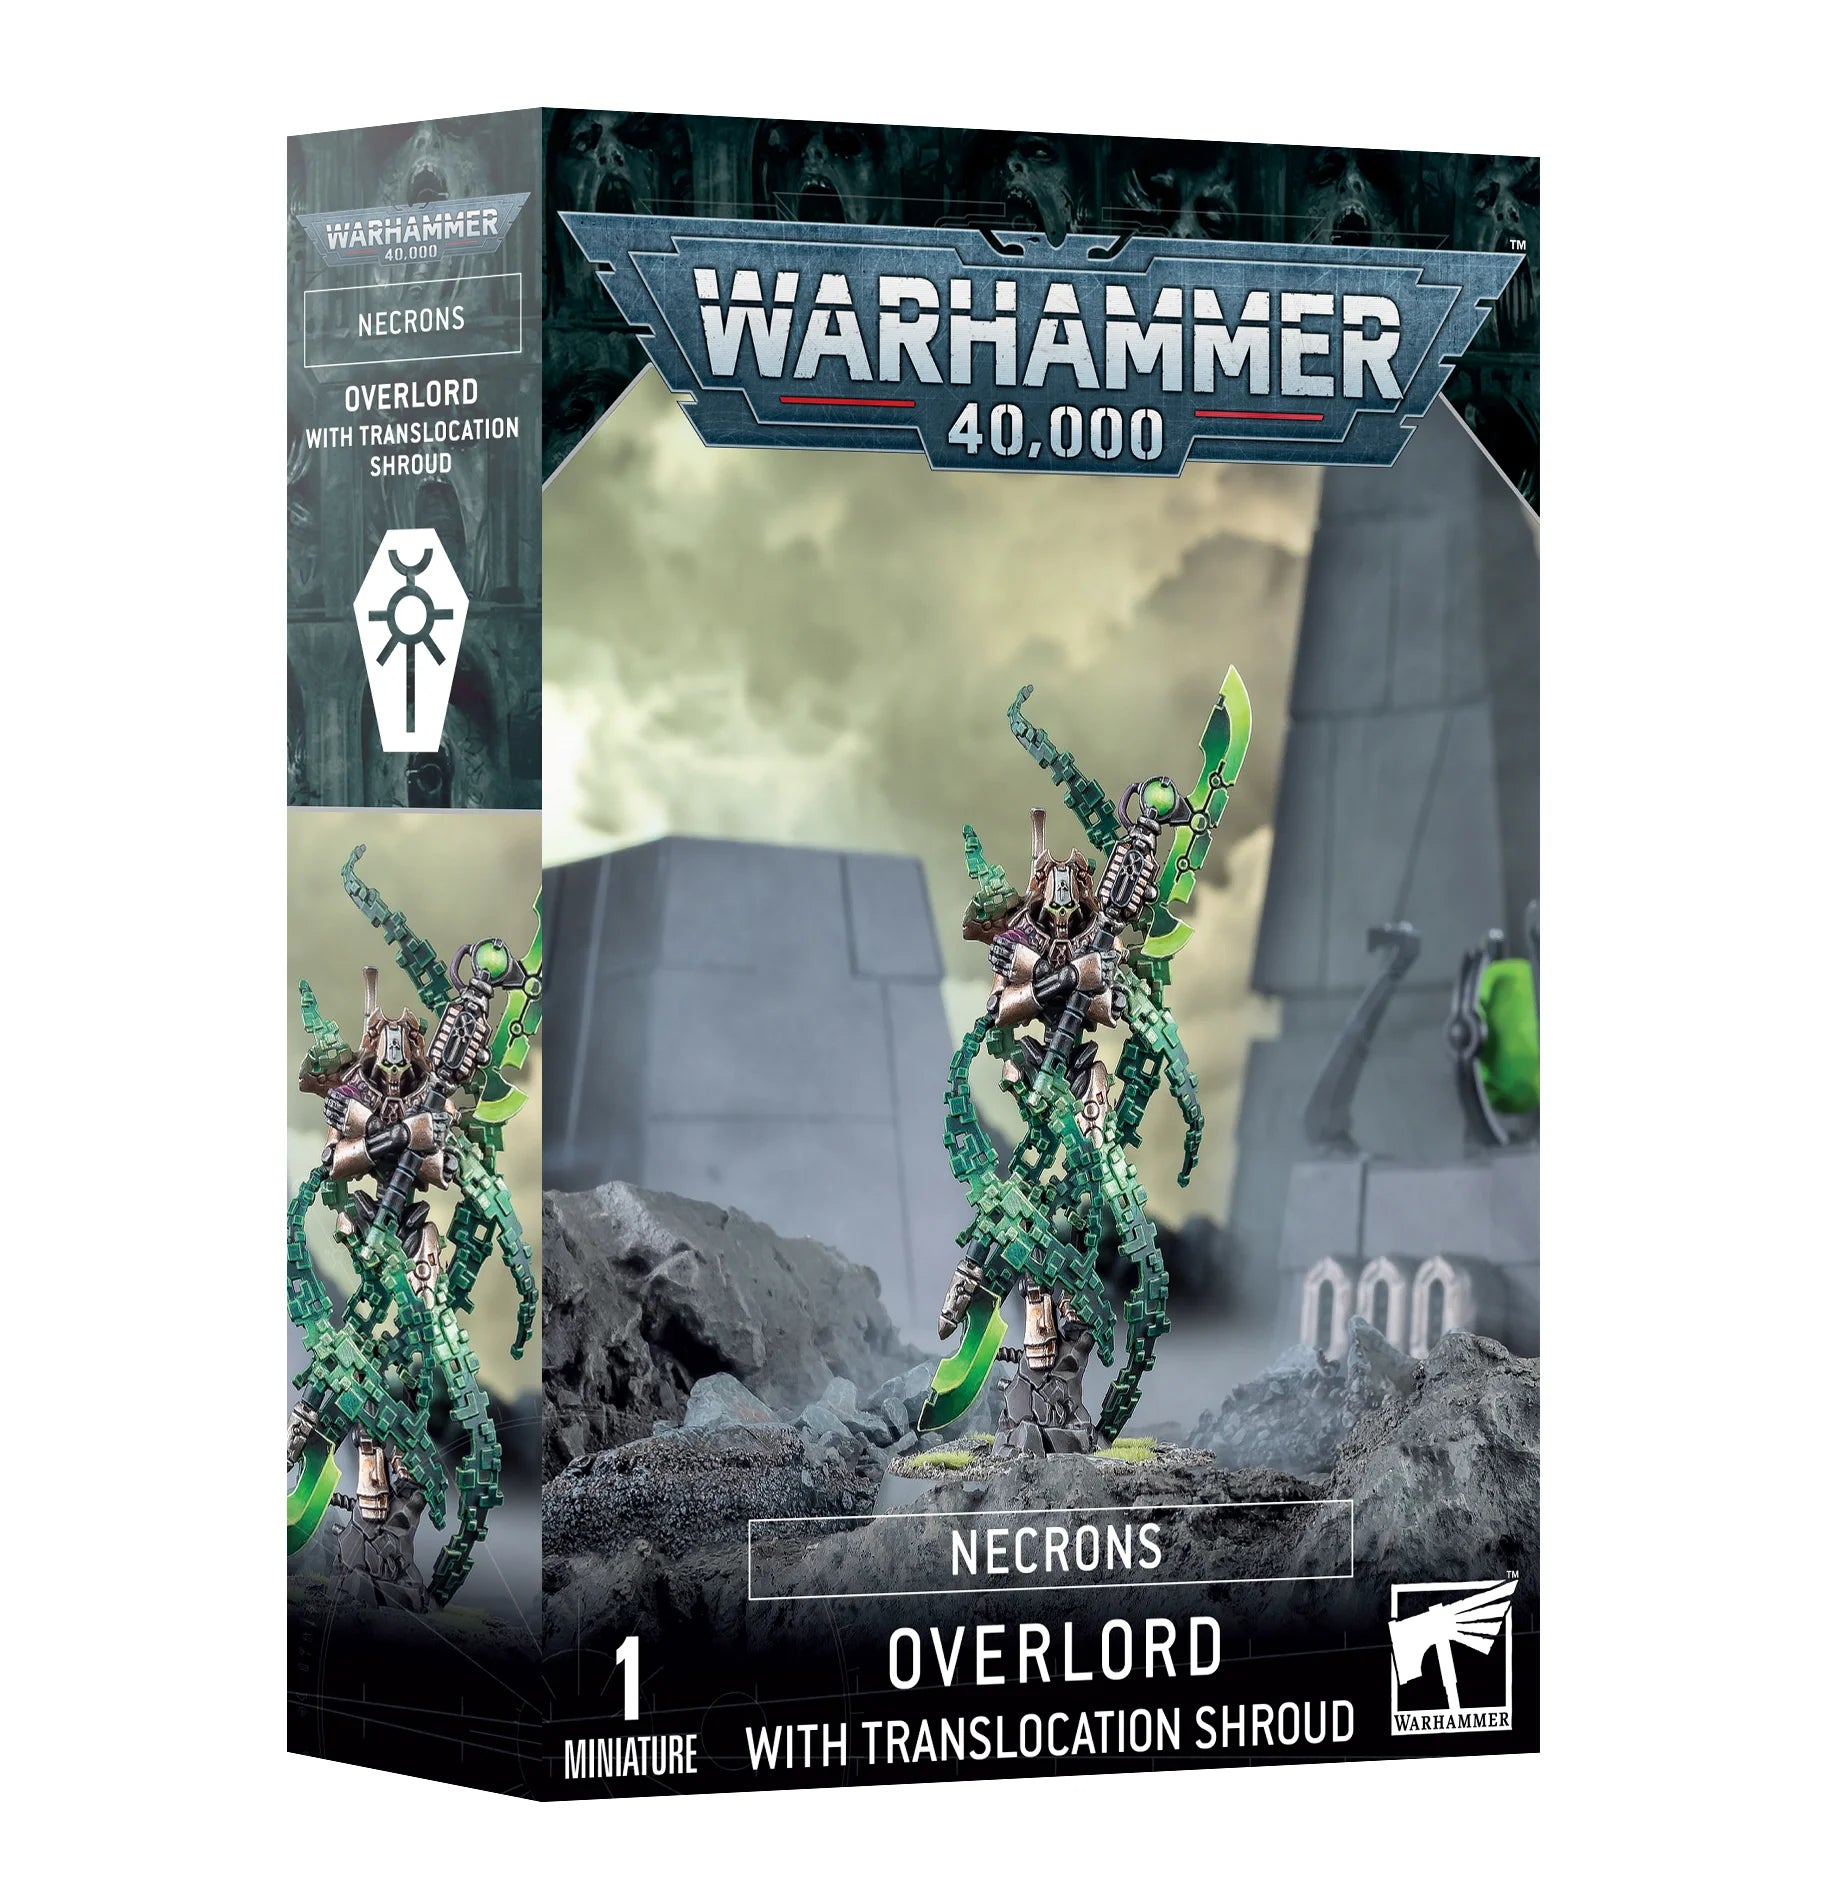 Warhammer 40000: Necrons Overlord with Translocation Shroud